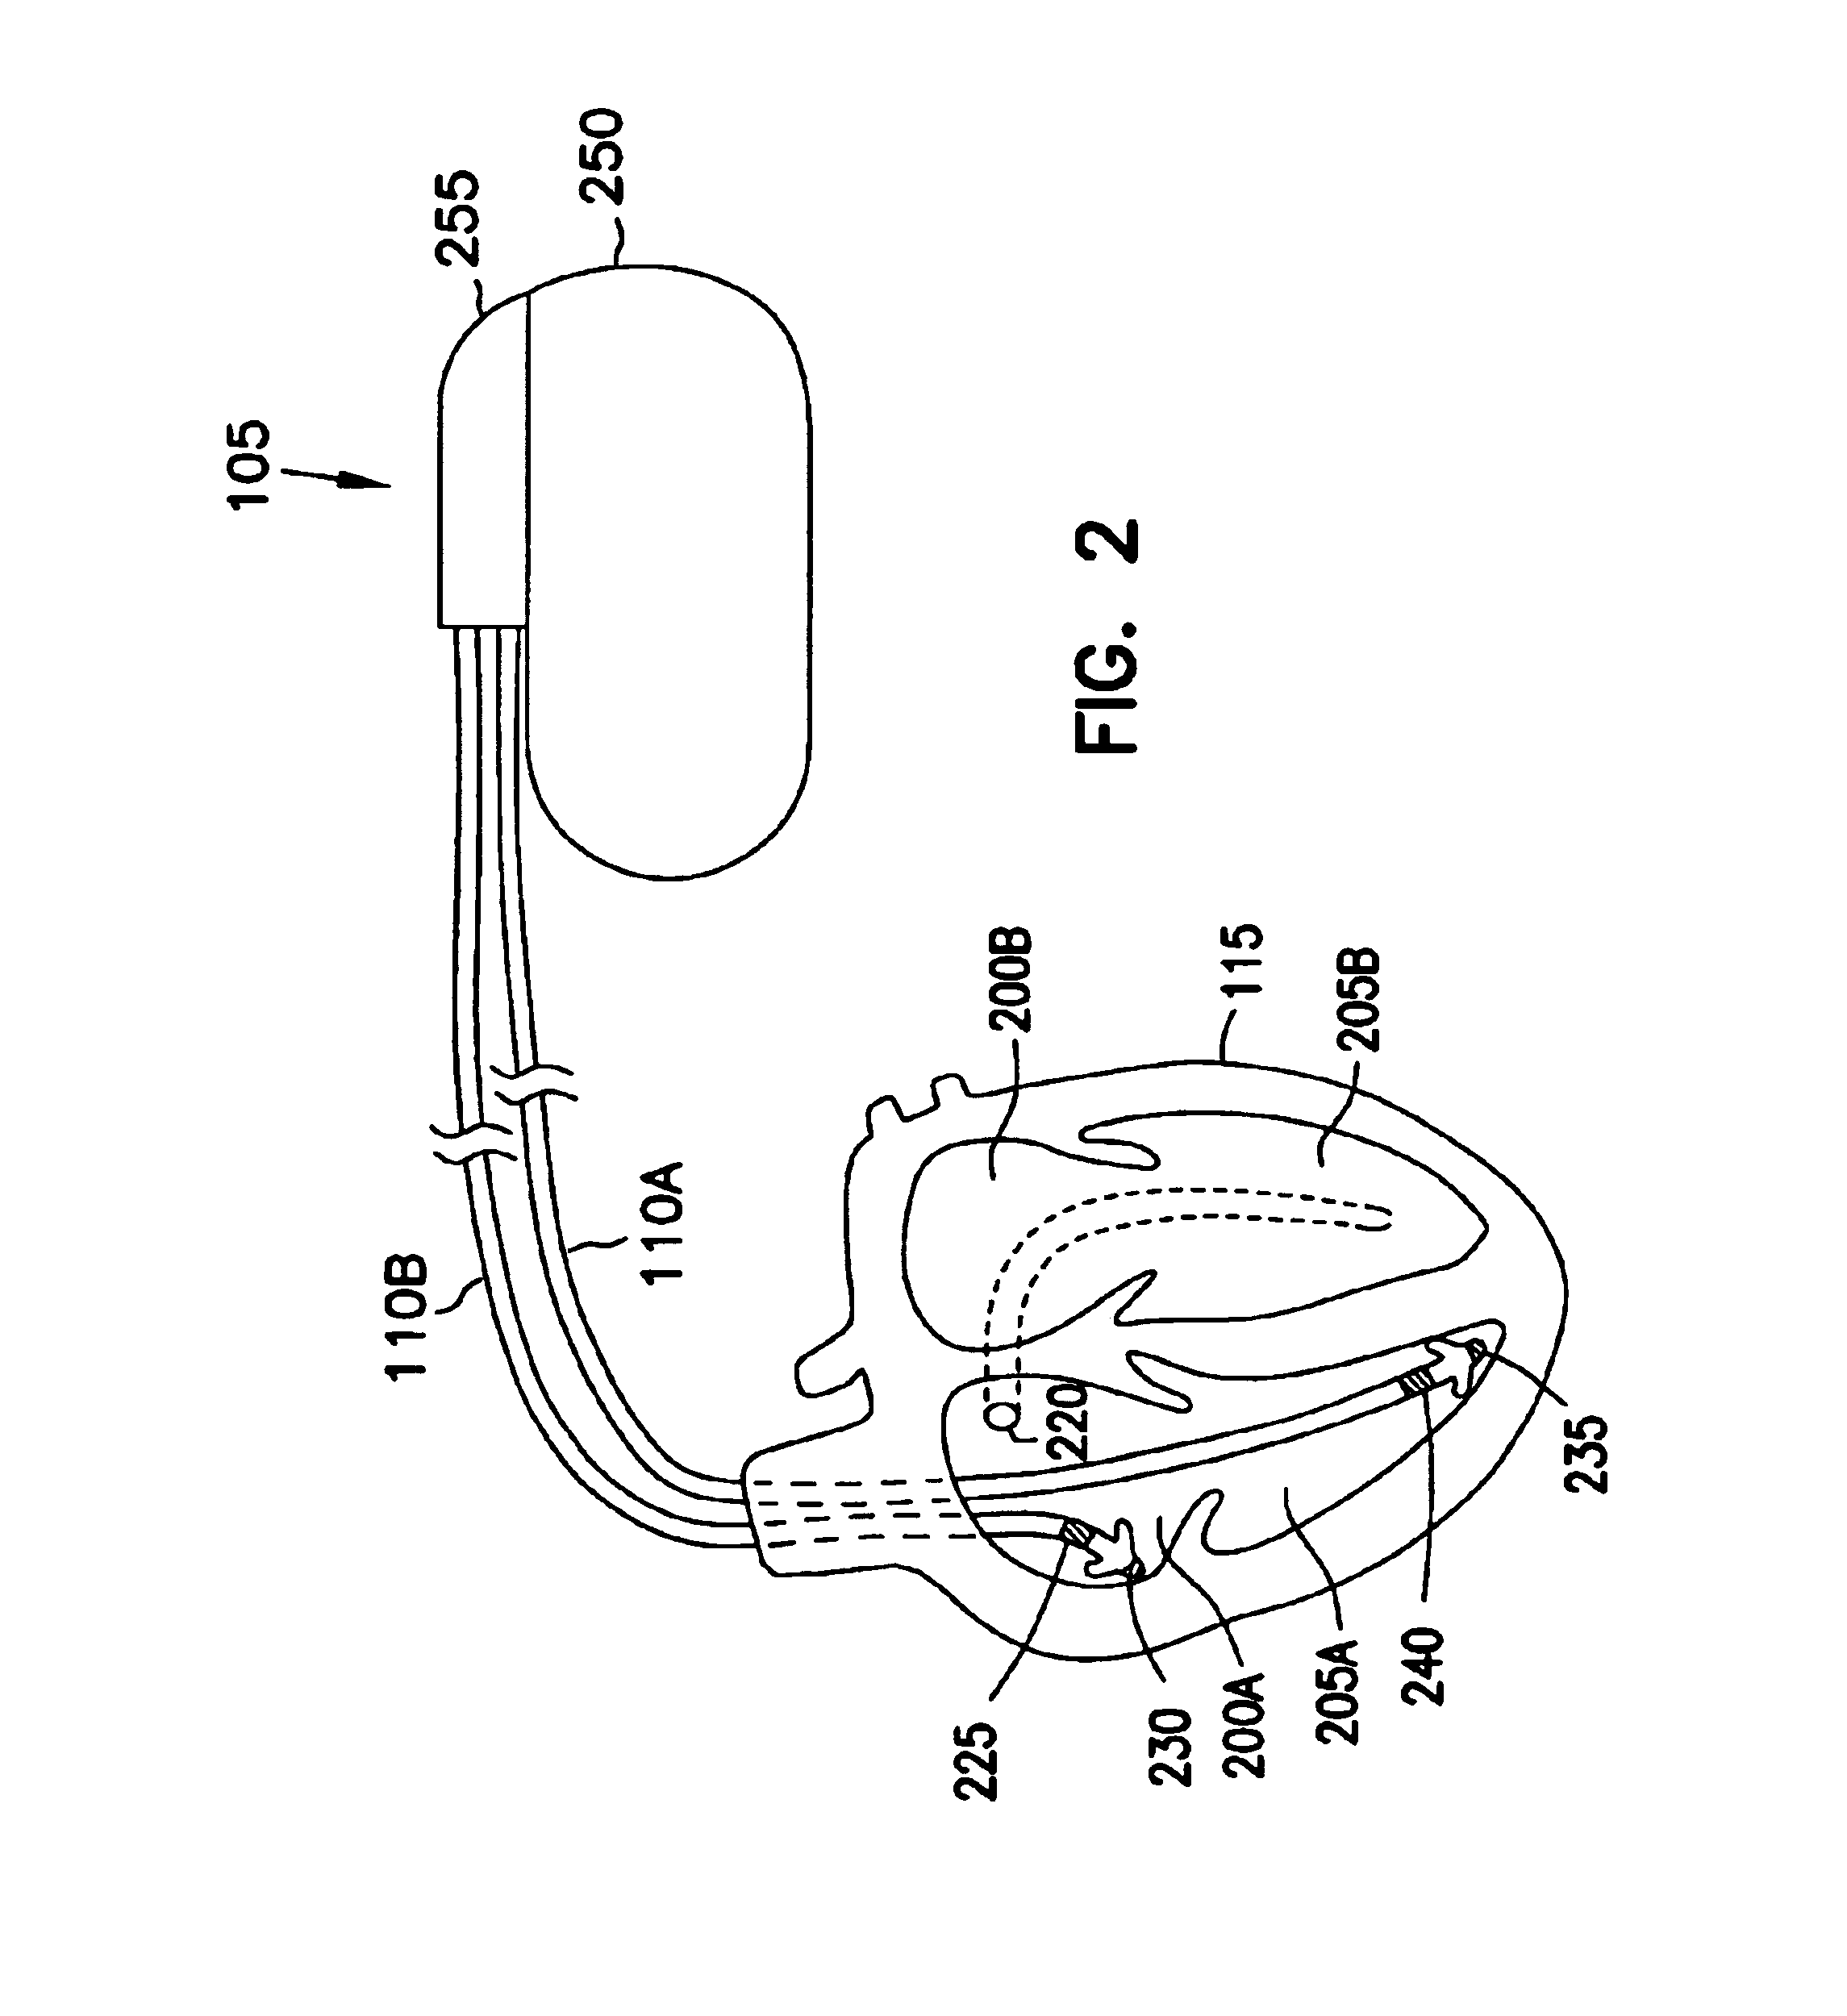 Method and apparatus for treating irregular ventricular contractions such as during atrial arrhythmia